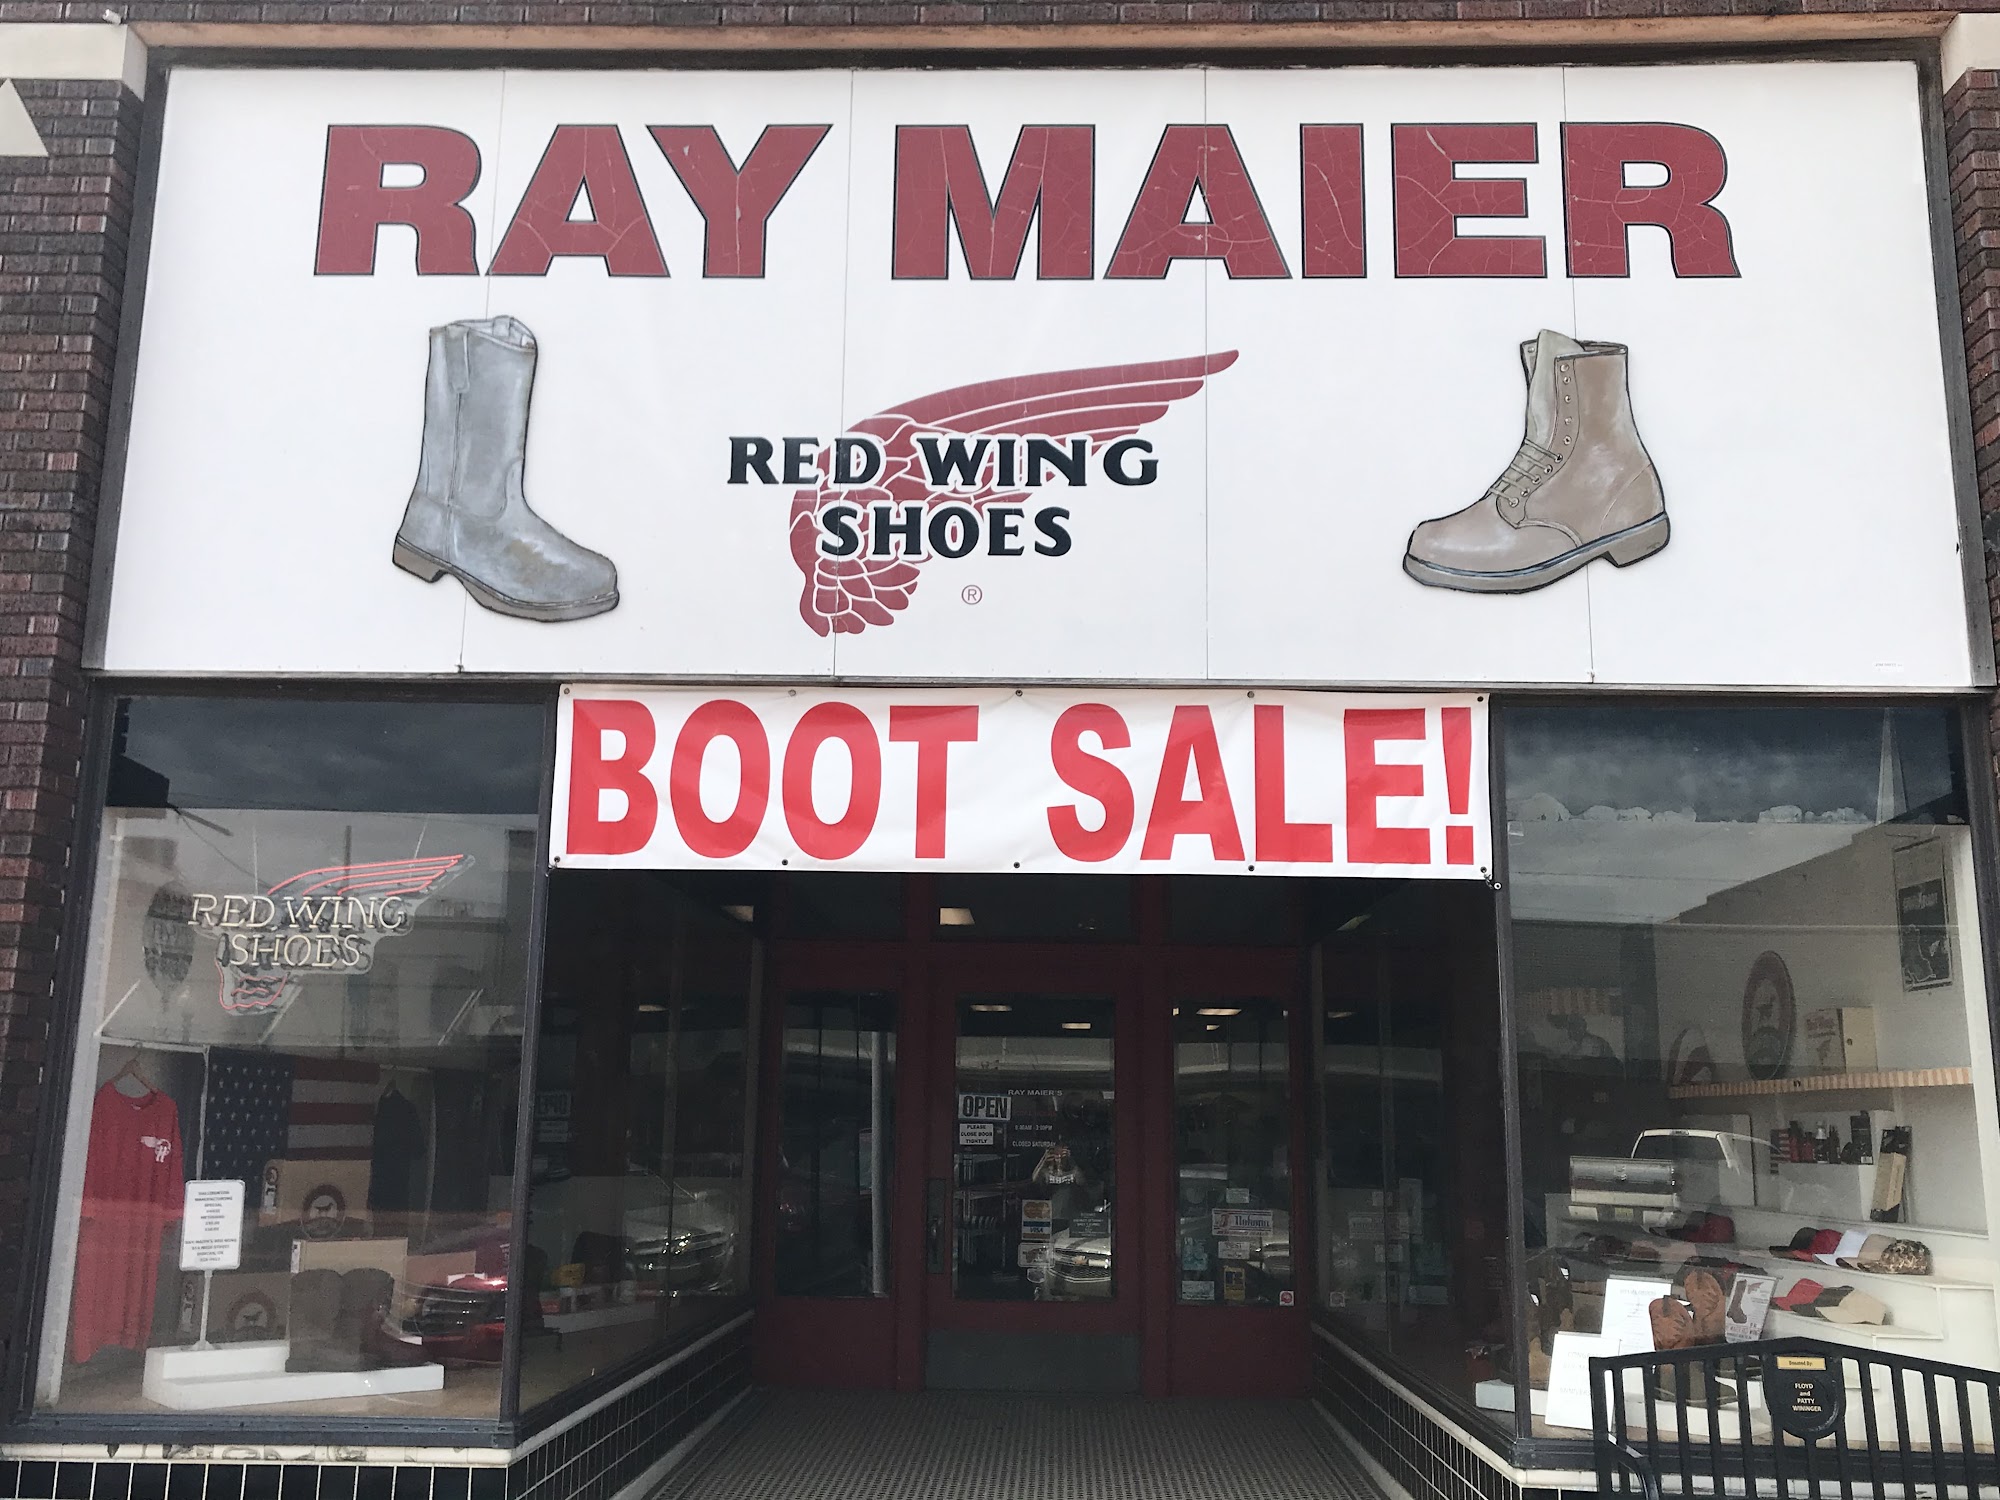 Ray Maier Sporting Goods